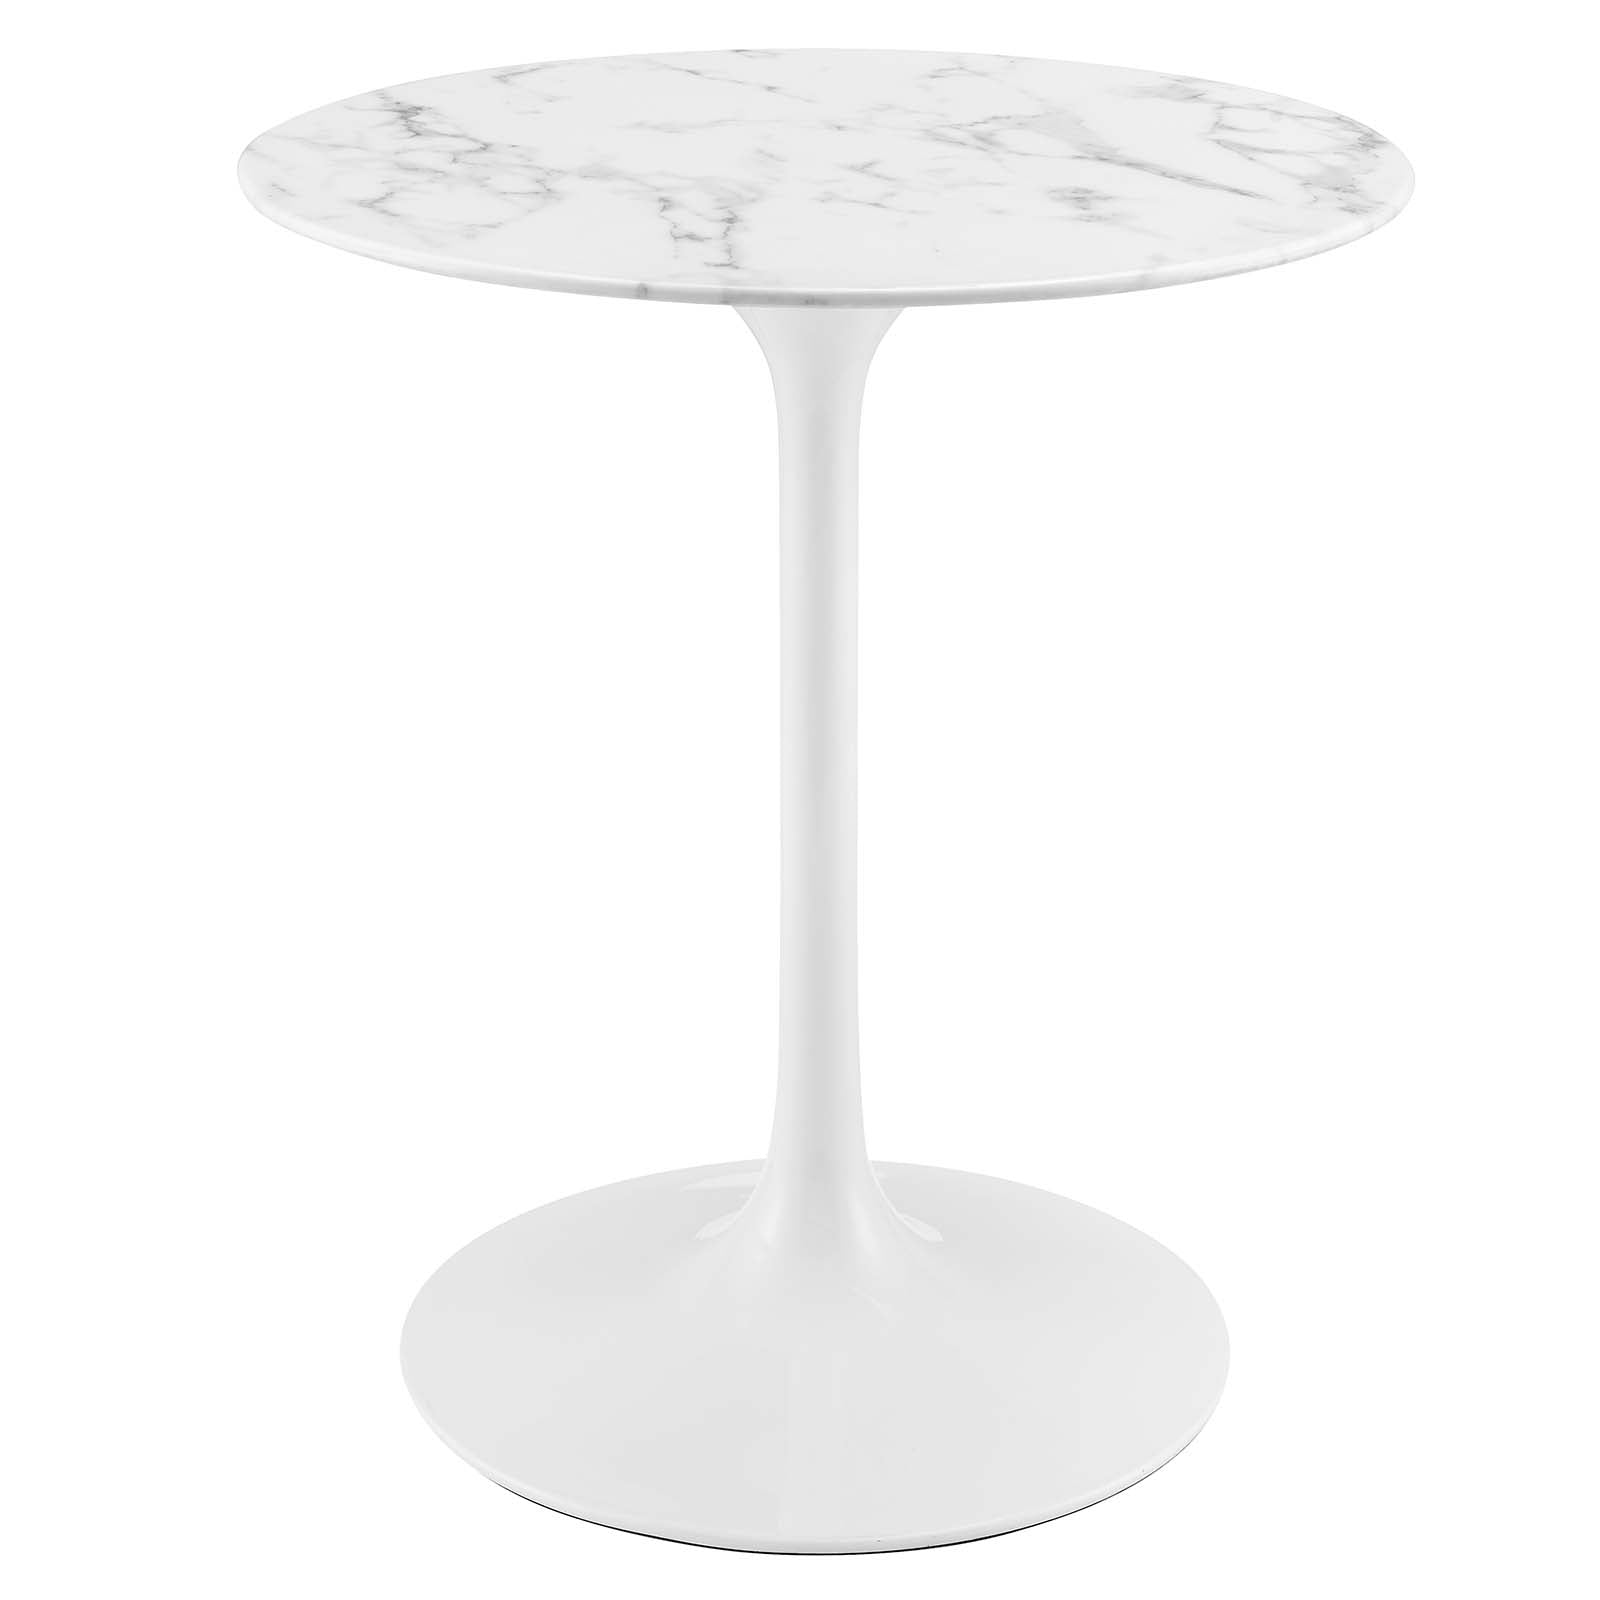 Lippa 28" Round Artificial Marble Dining Table-Dining Table-Modway-Wall2Wall Furnishings